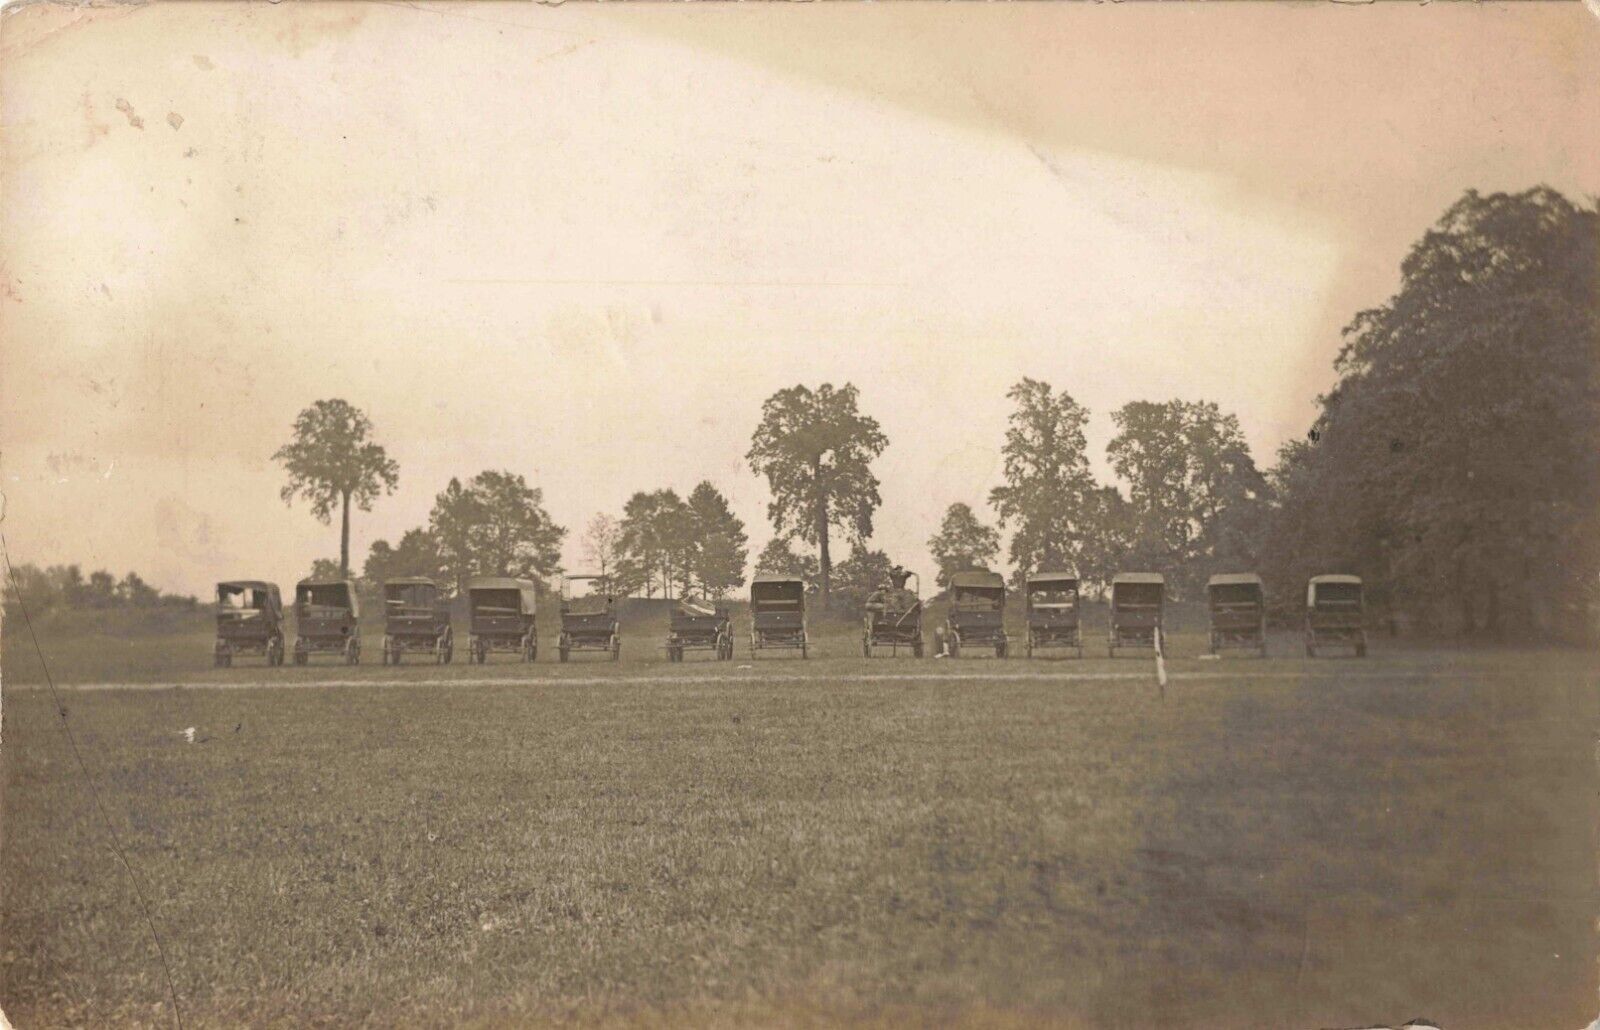 Old Cars Lined Up Fort Ancient Oregonia Ohio OH 1912 Real Photo RPPC